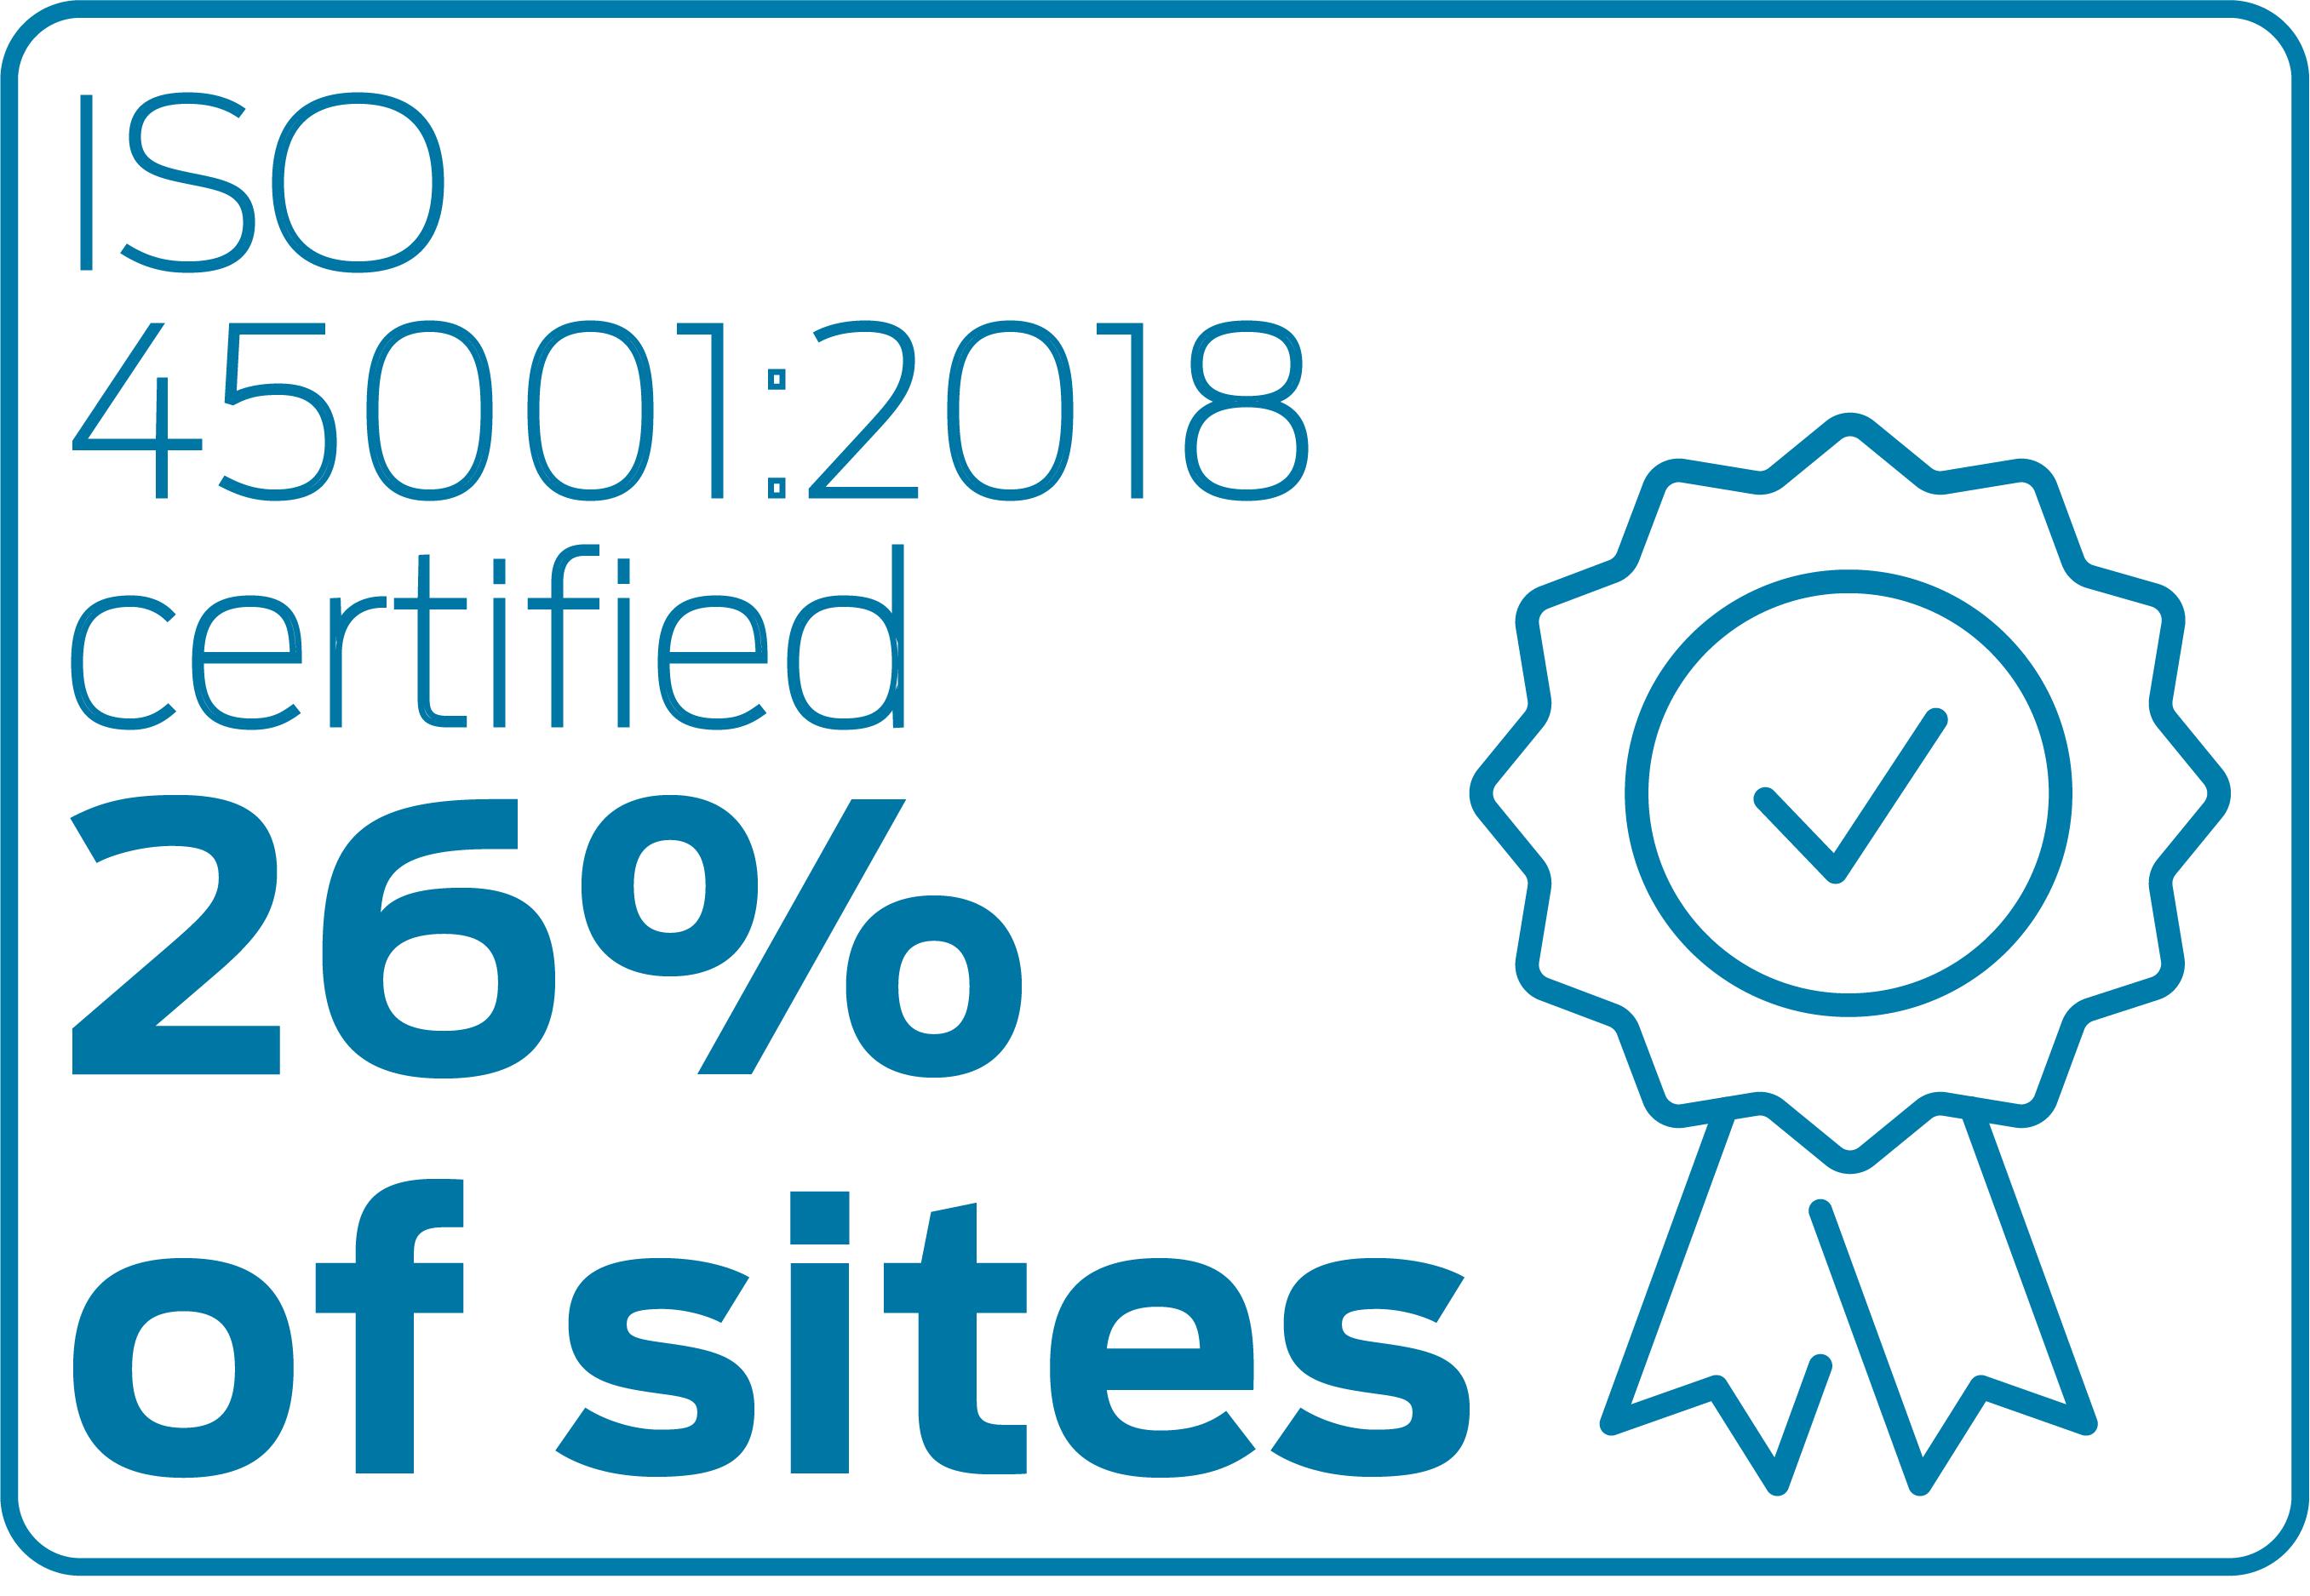 ISO 45001:2018 certified 26% of sites